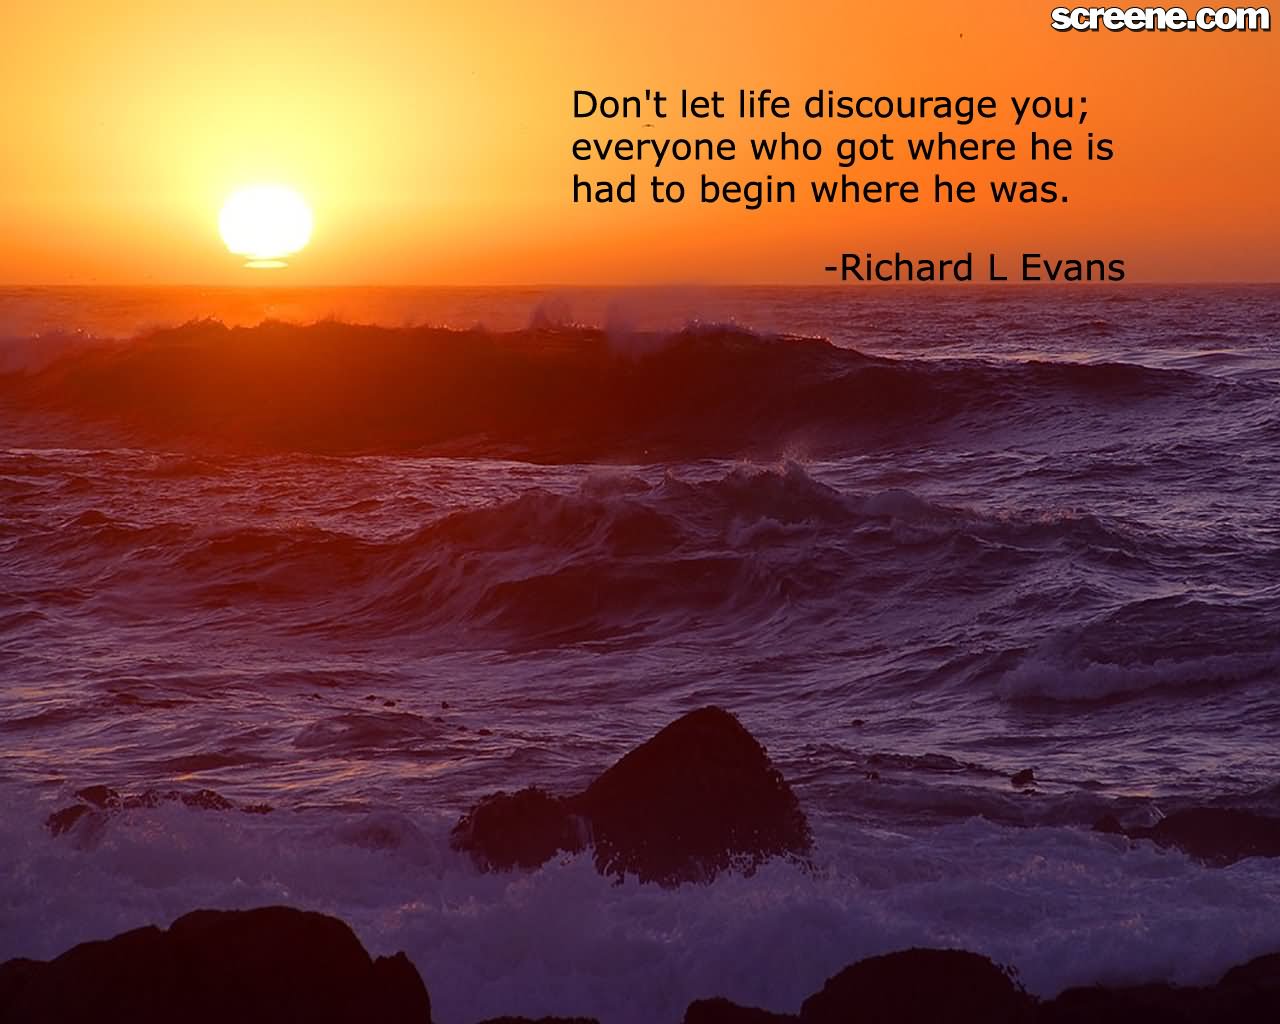 Don’t let life discourage you; everyone who got where he is had to begin where he was.